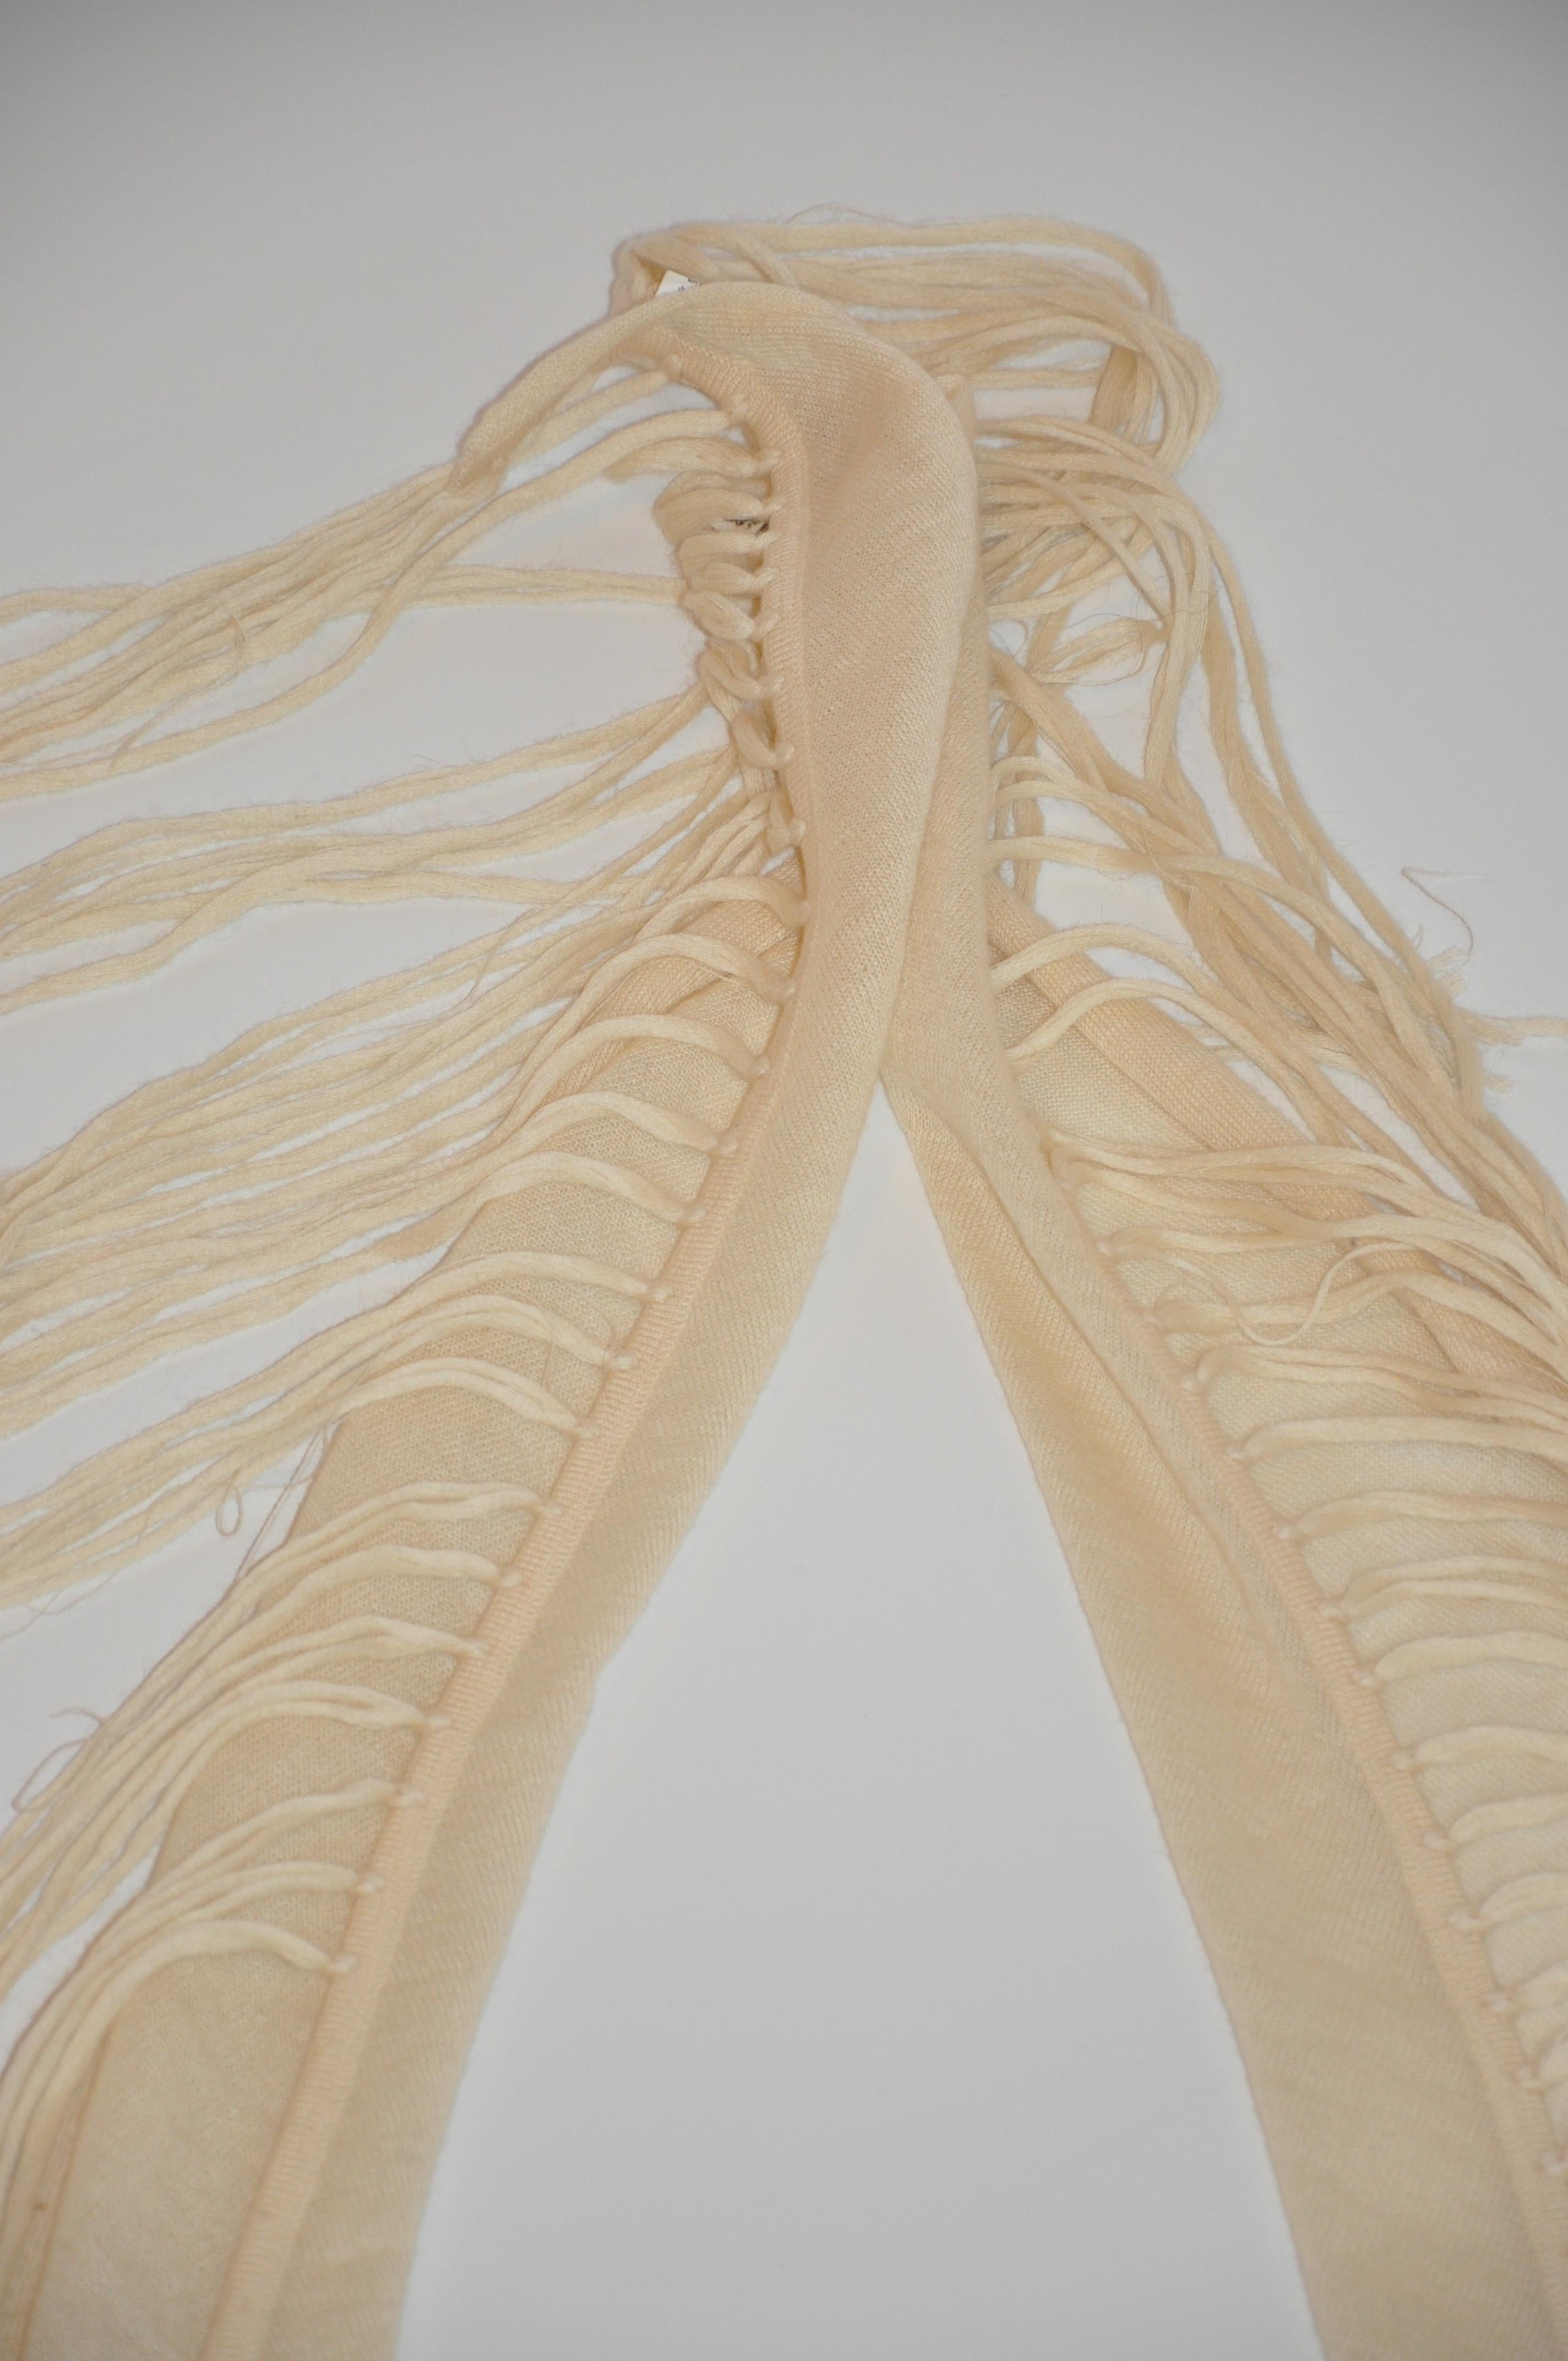 Bottega Veneta Cream Woven Cashmere and Mohair Deconstructed Fringed Scarf  In Fair Condition For Sale In New York, NY